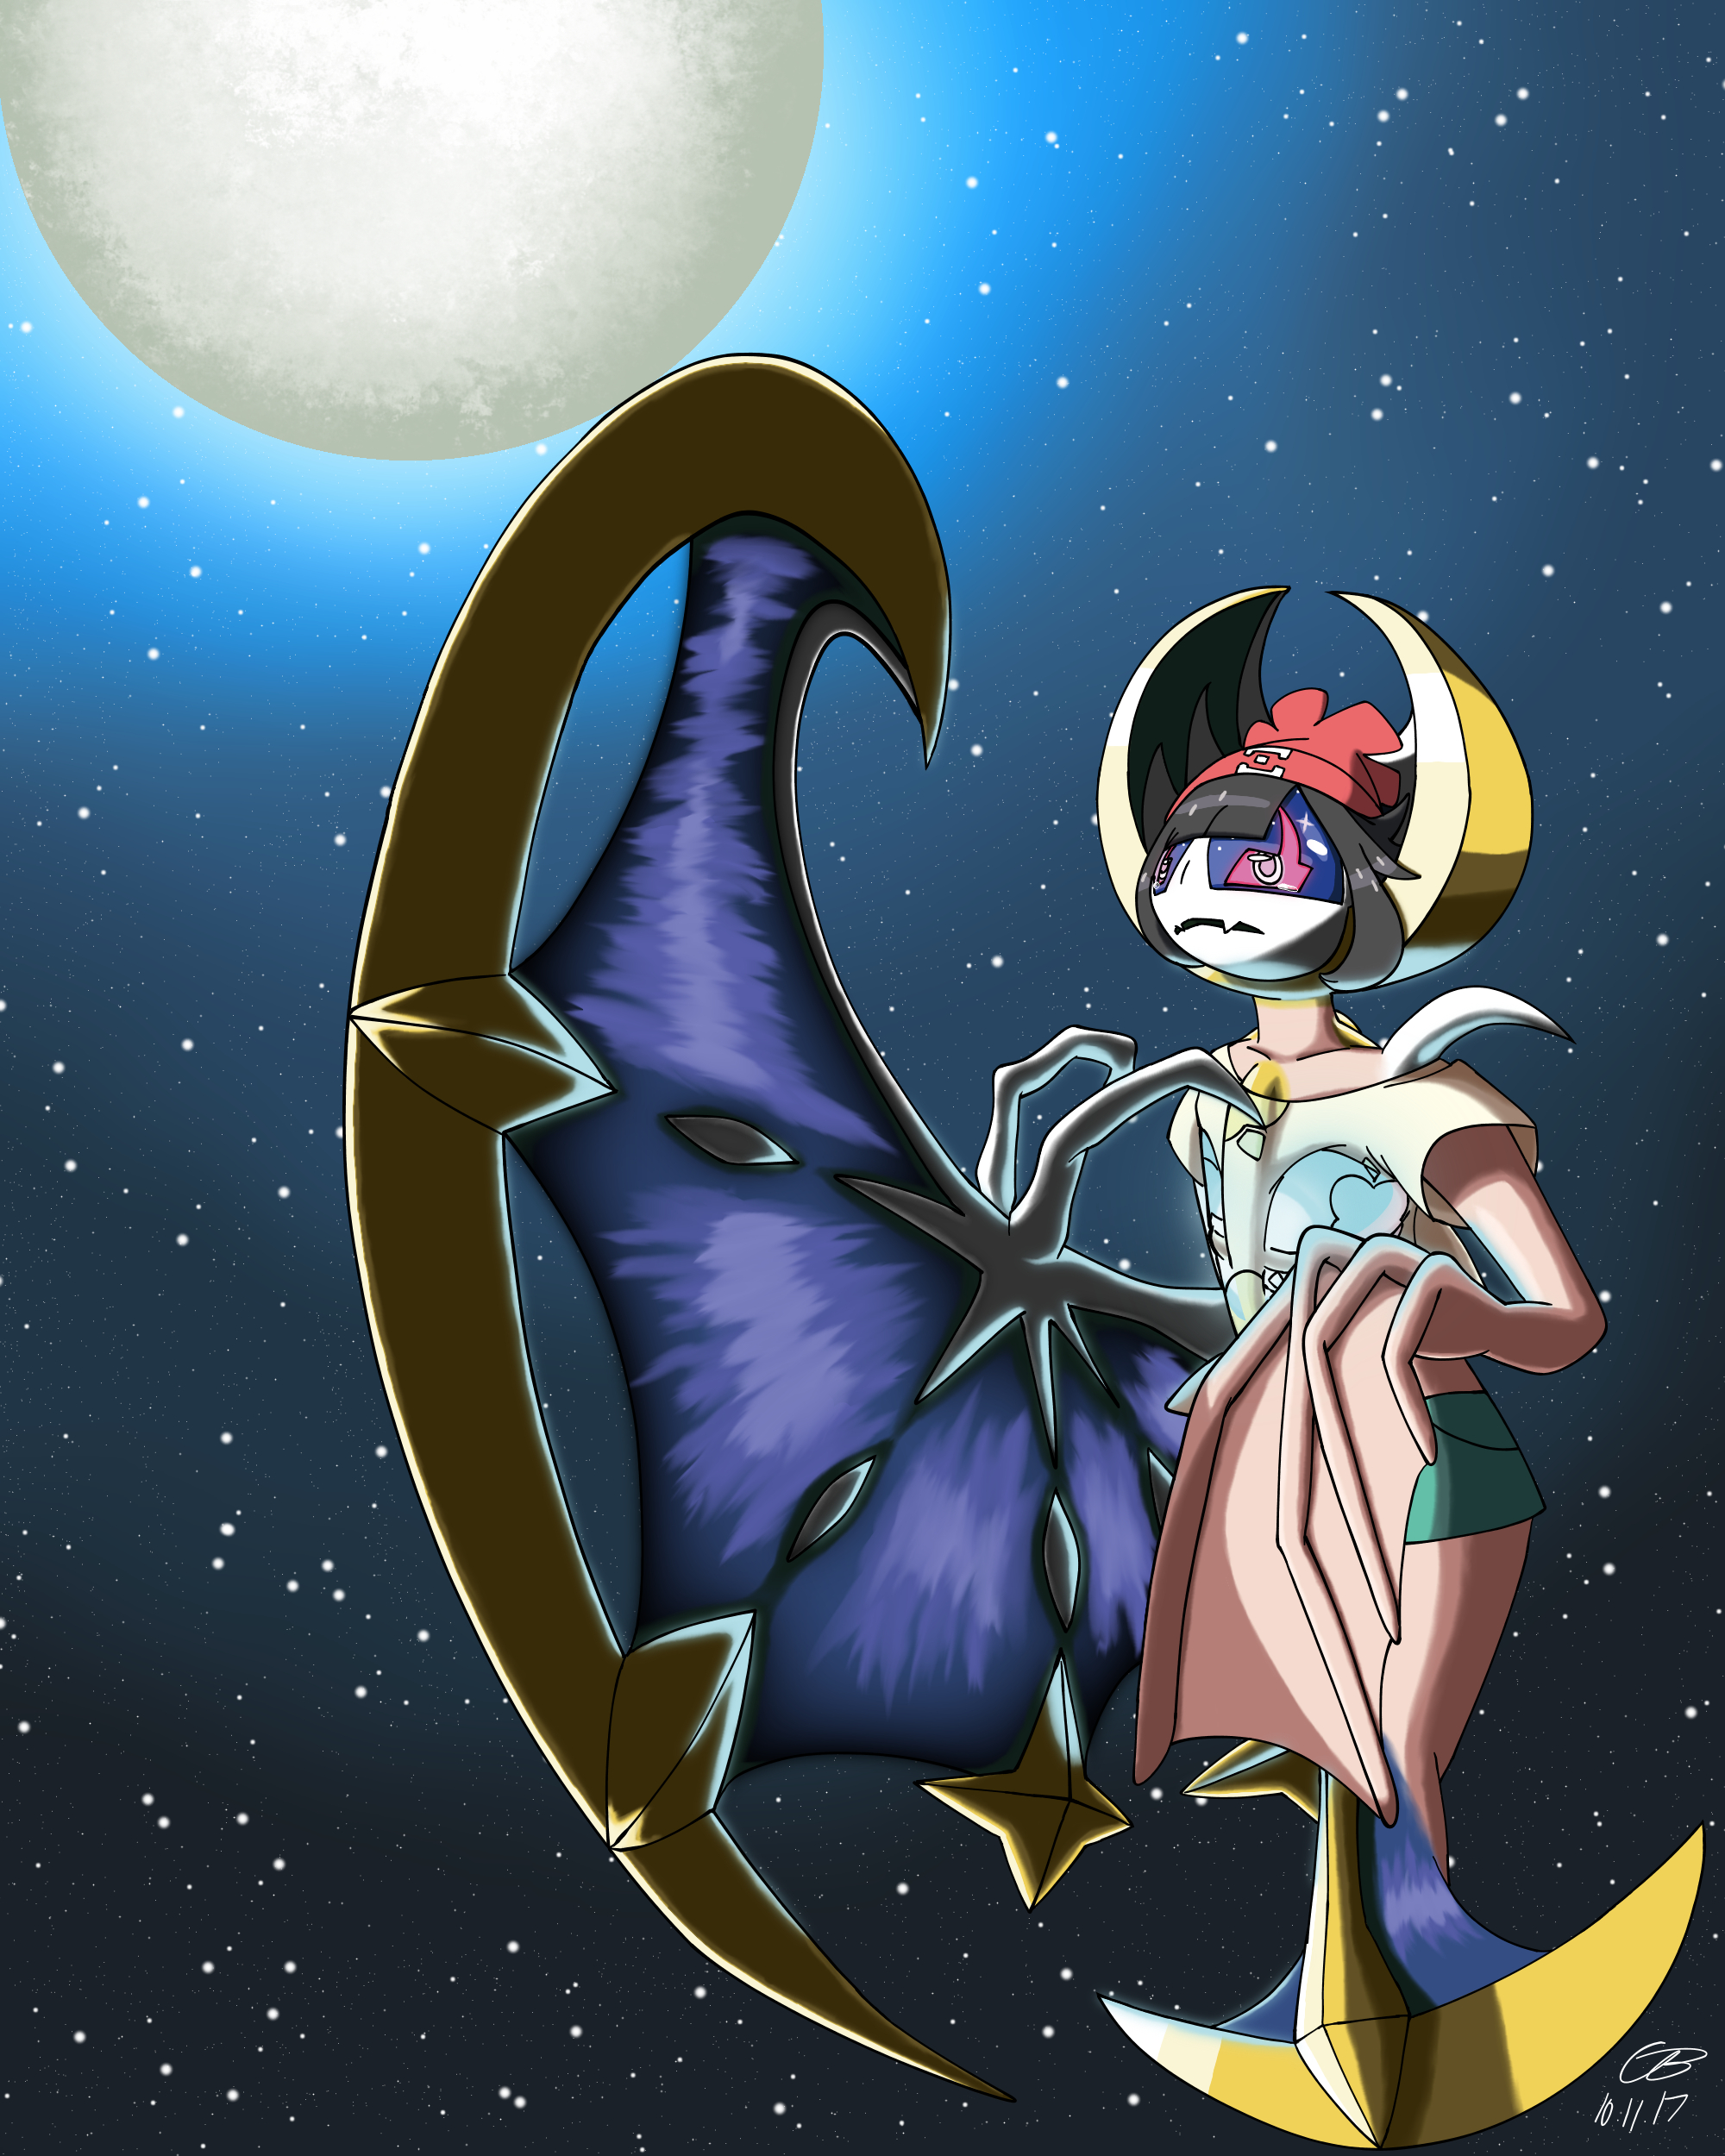 Halloween All The Time on X: This started off as a shiny #Lunala